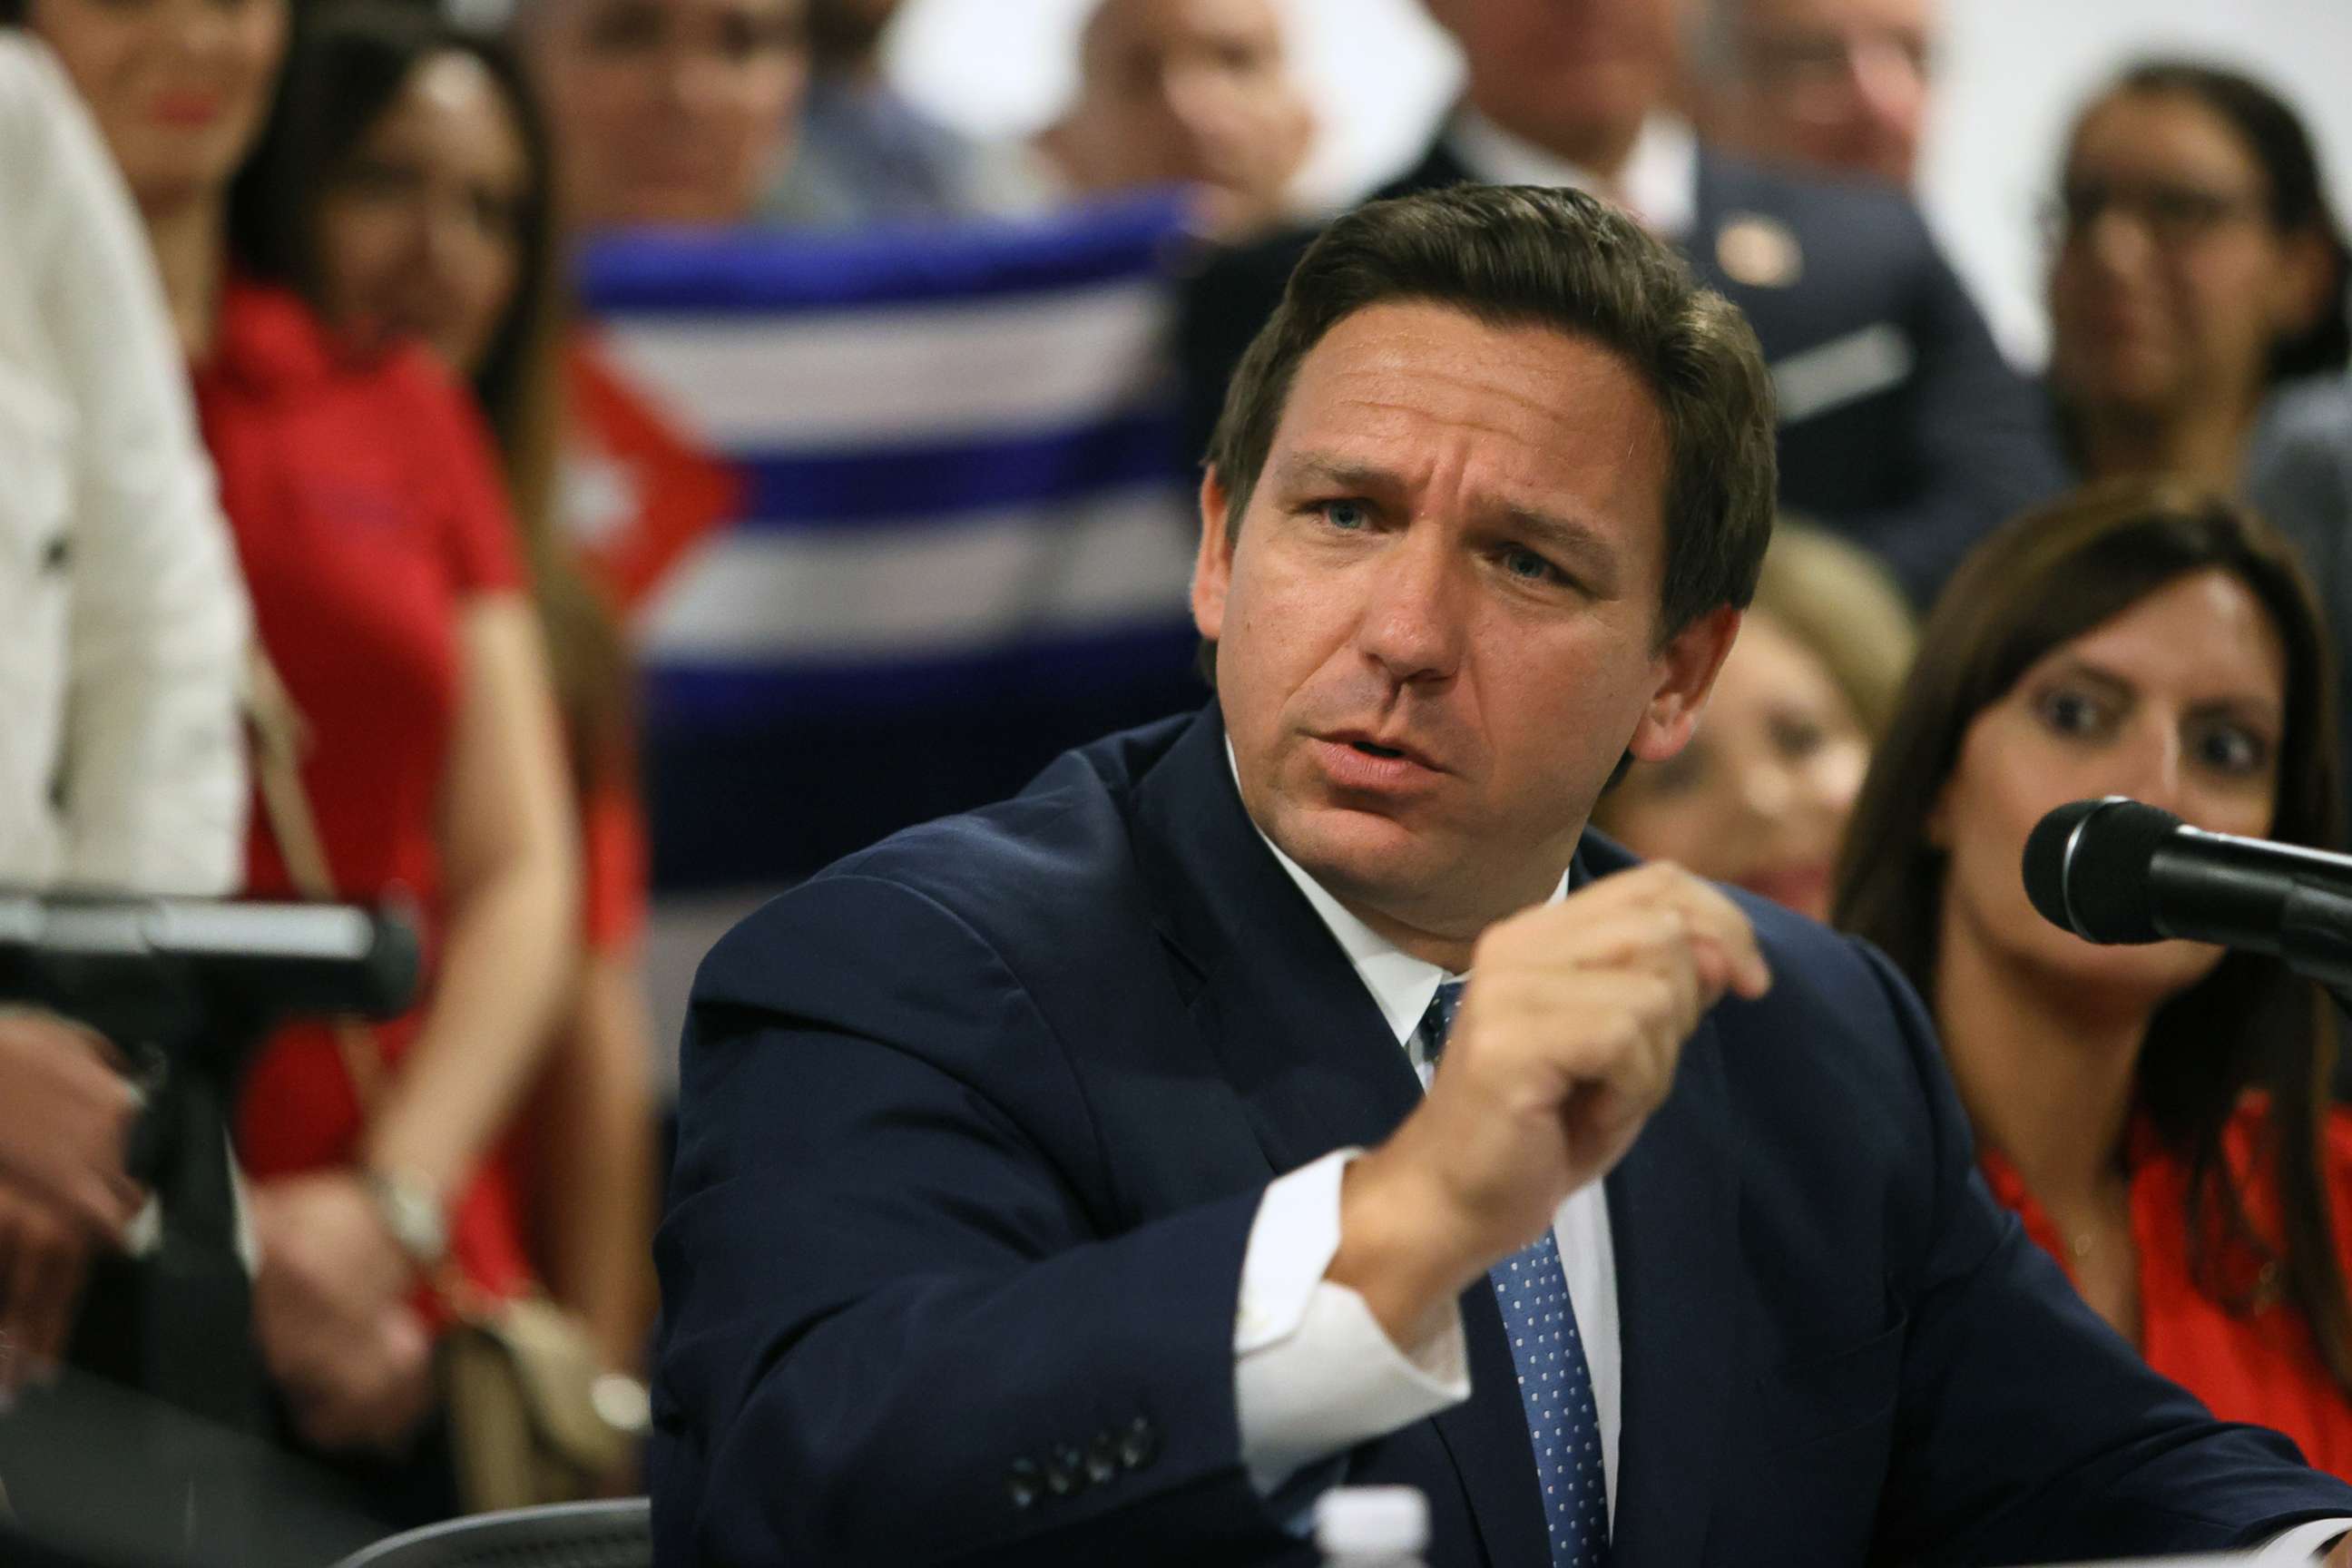 PHOTO: Florida Gov. Ron DeSantis takes part in a roundtable discussion about the uprising in Cuba at the American Museum of the Cuba Diaspora, July 13, 2021, in Miami.